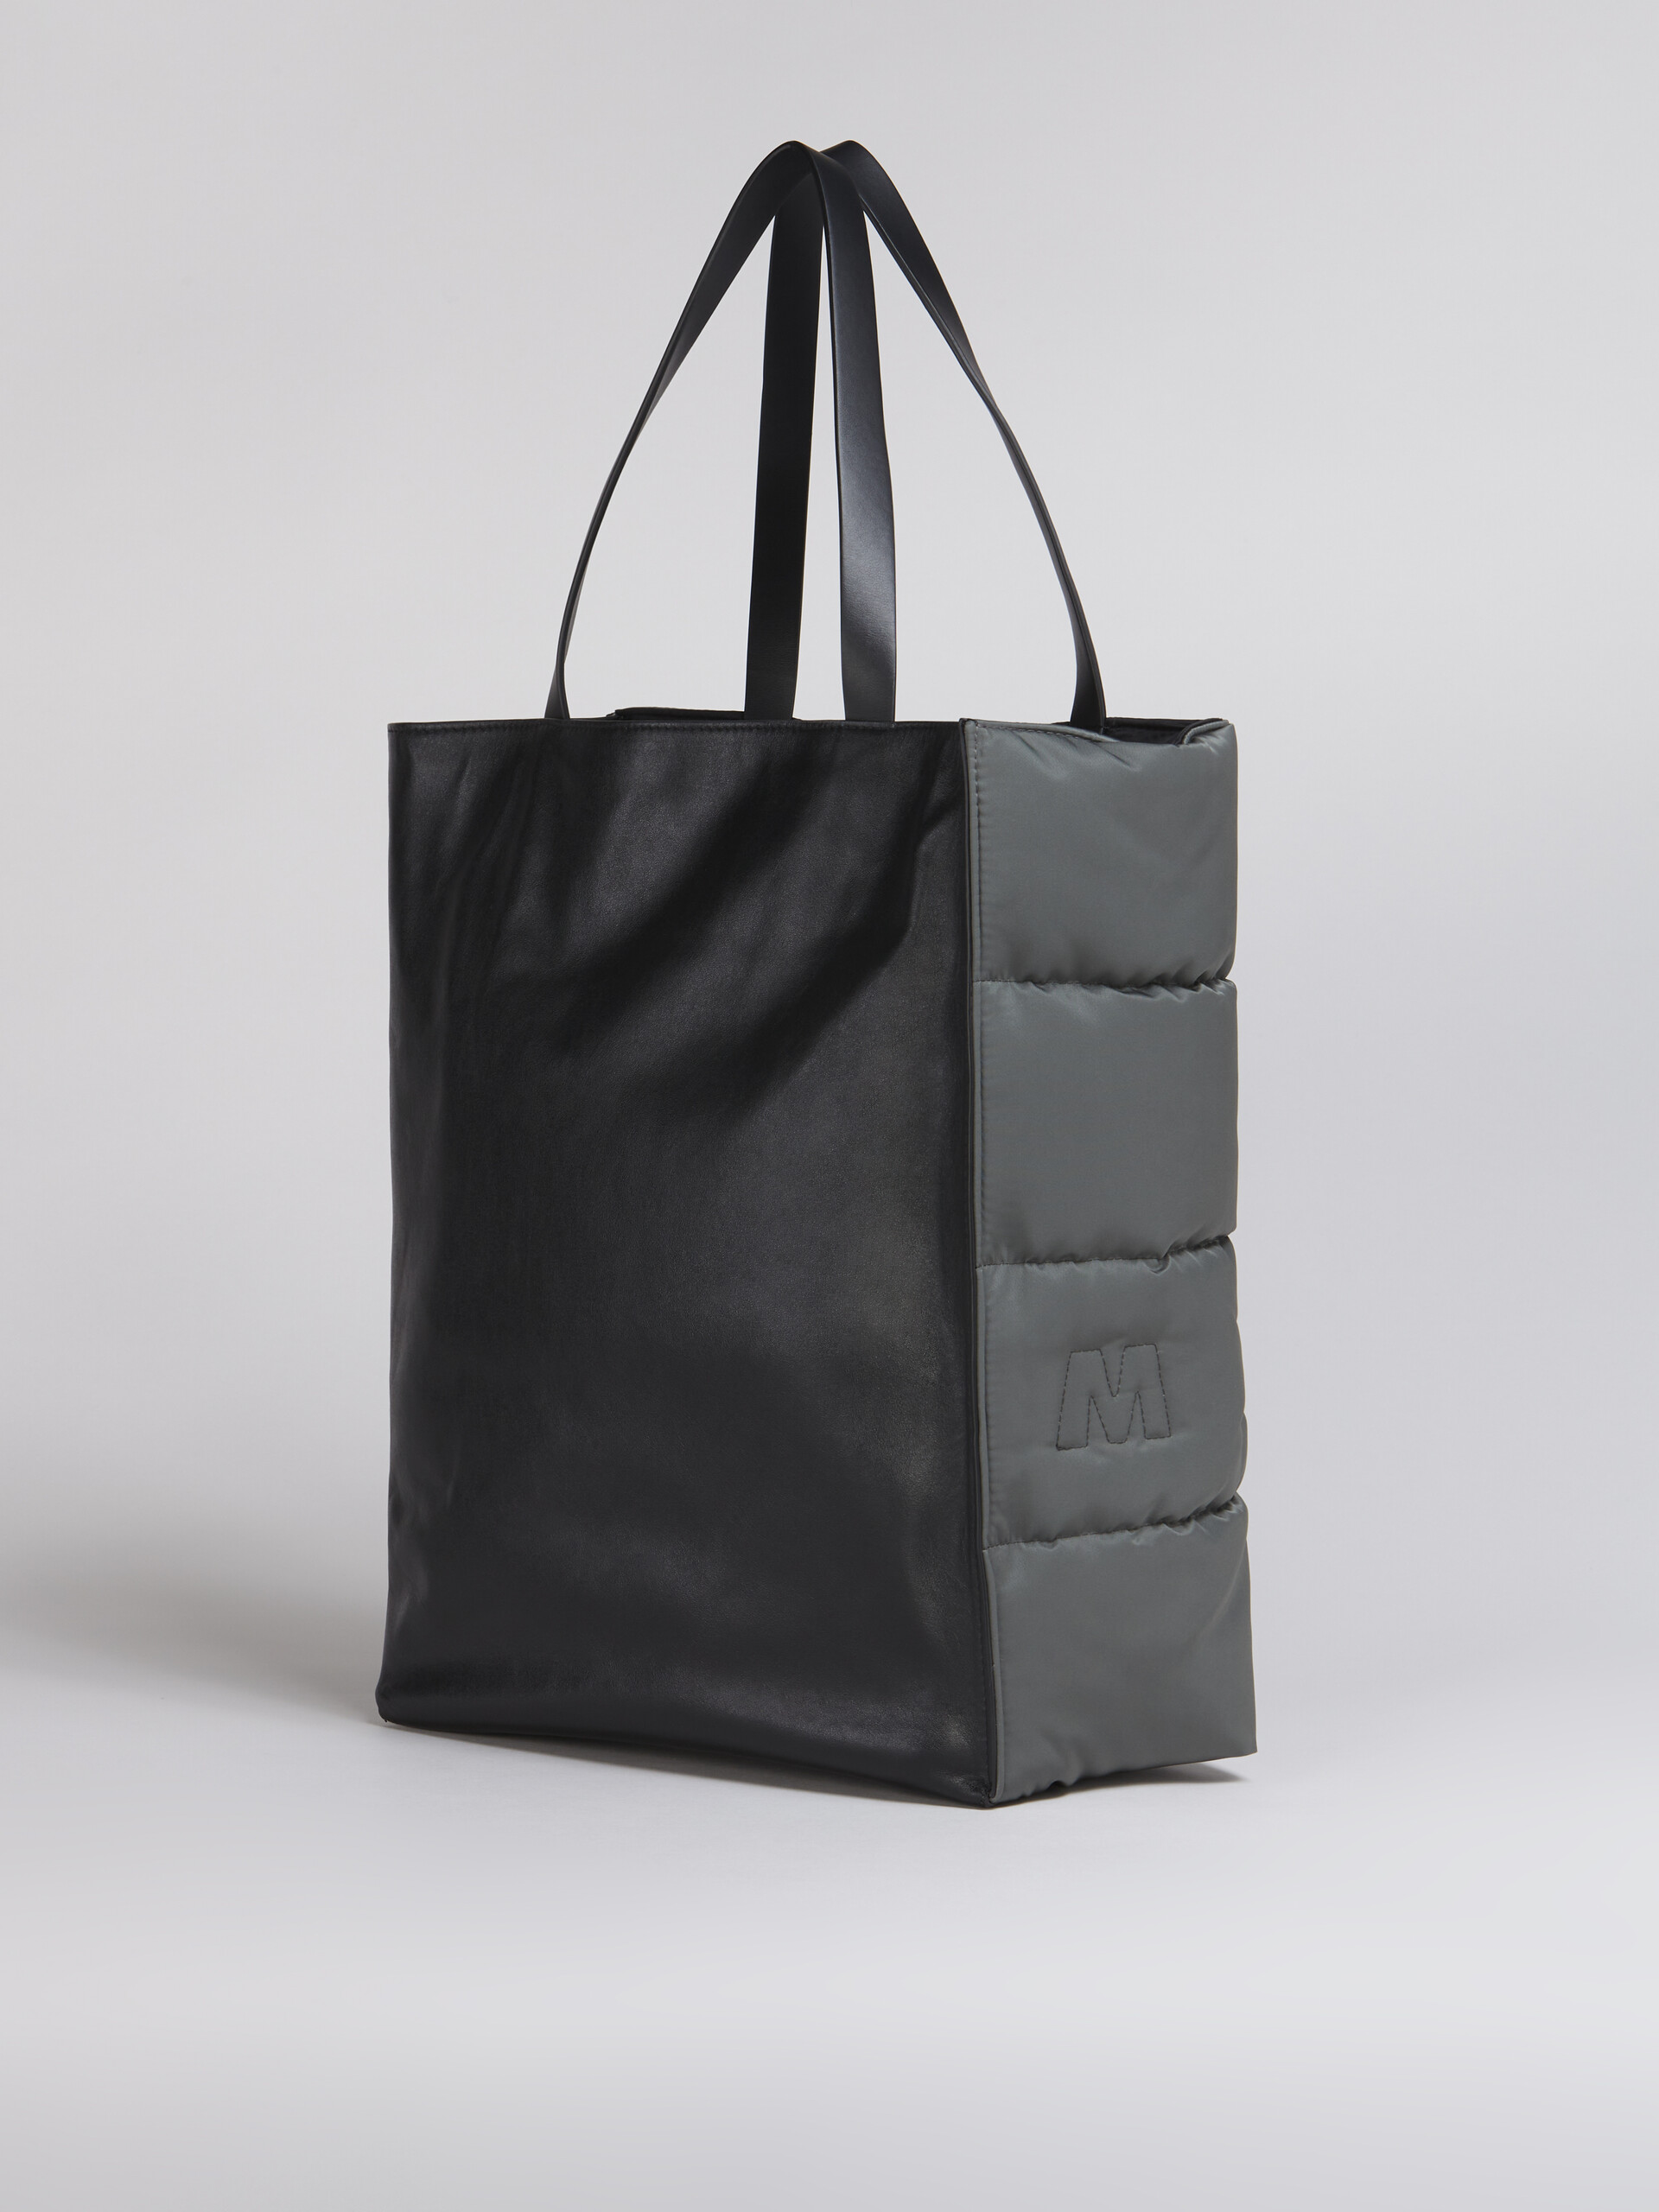 MUSEO large bag in grey nylon - Shopping Bags - Image 3